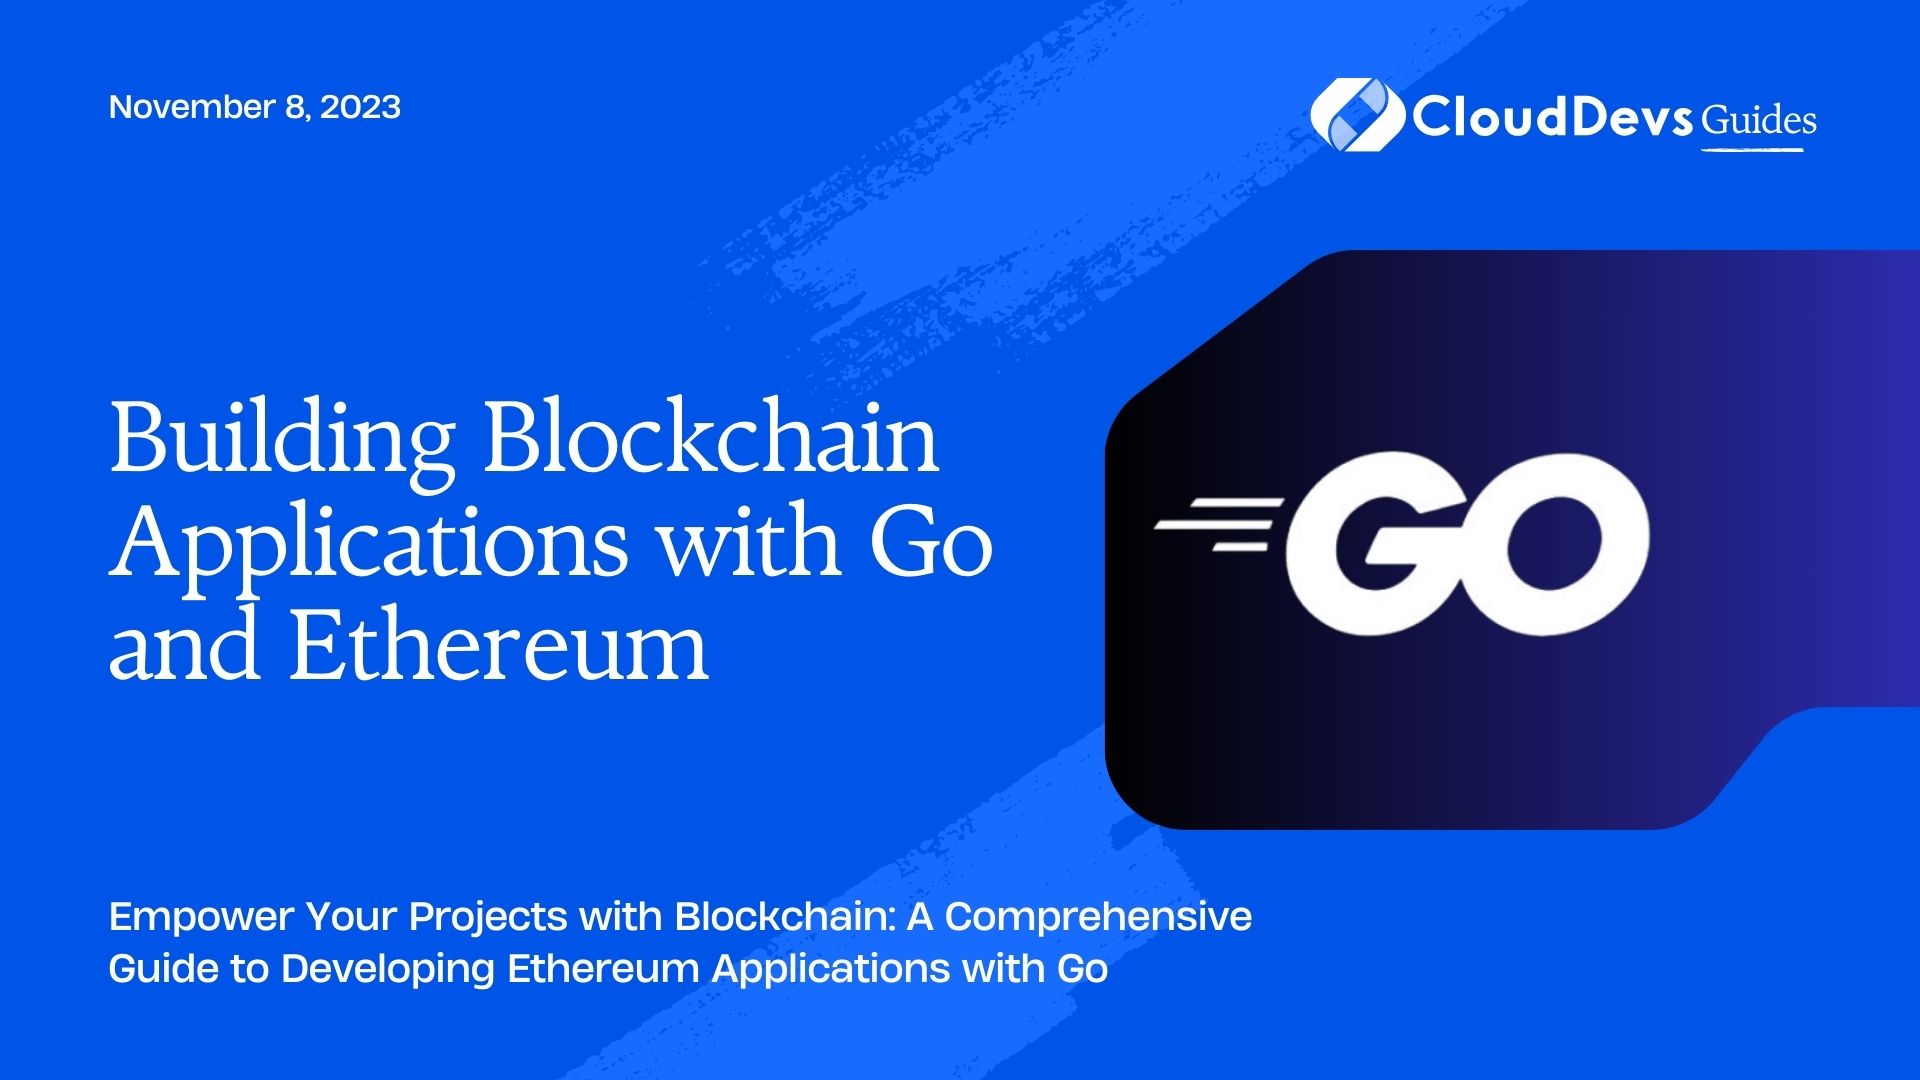 Building Blockchain Applications with Go and Ethereum